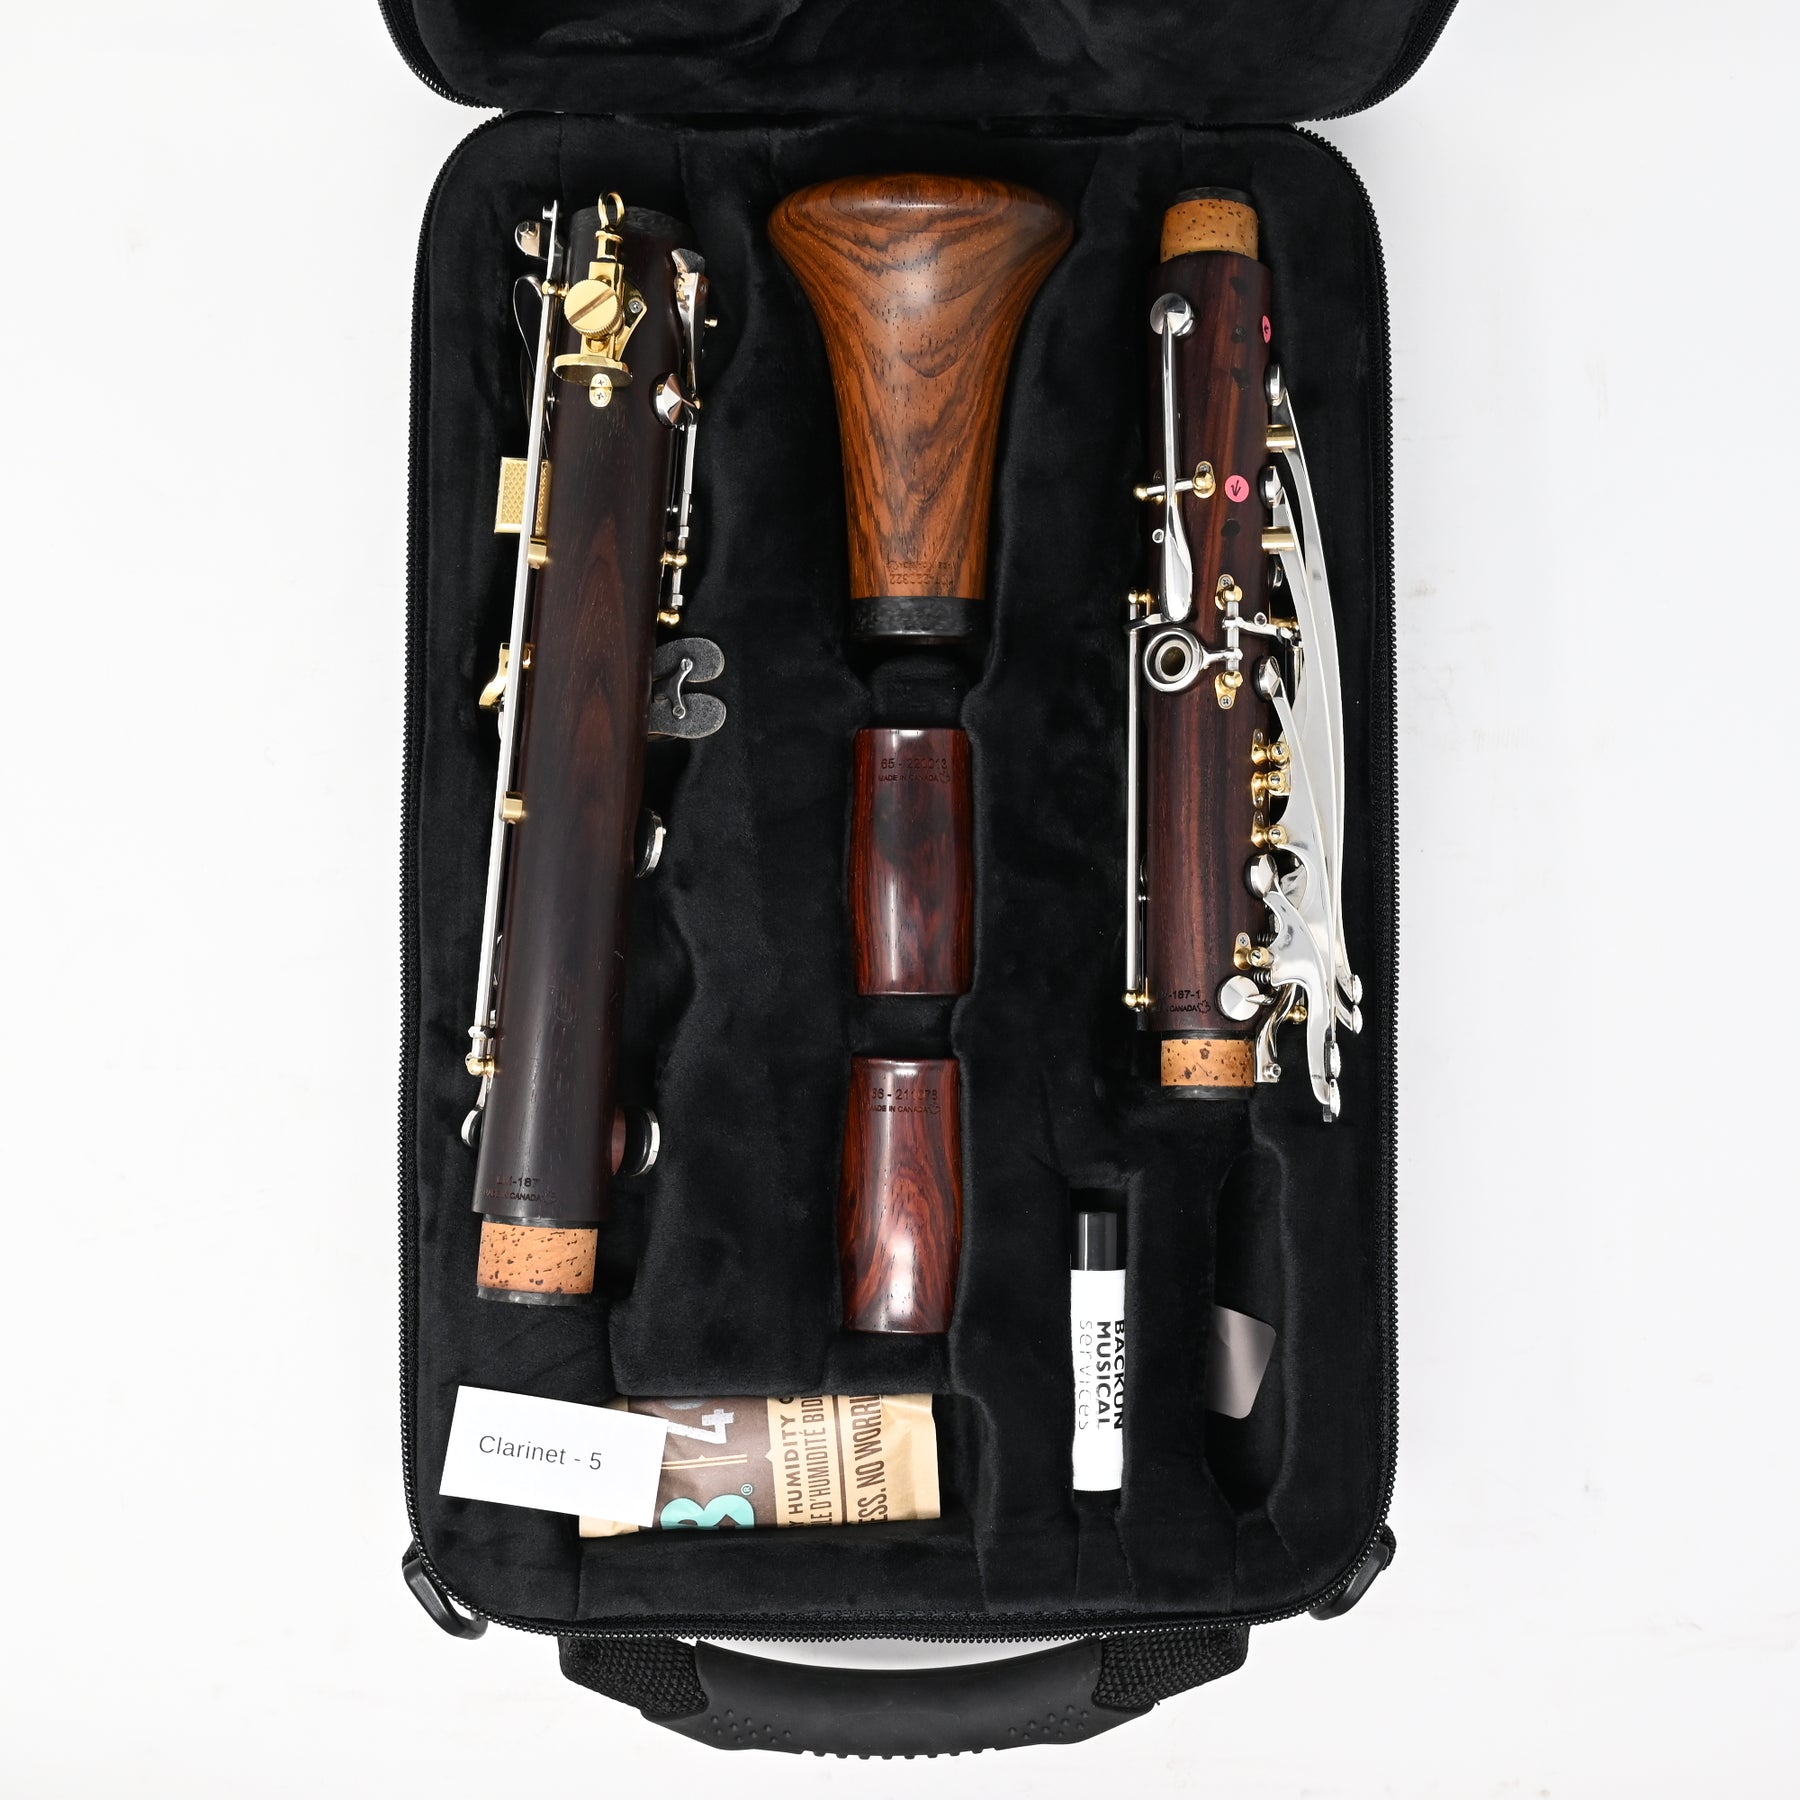 Pre-Owned Lumiere Bb Clarinet, Cocobolo with Gold Posts/Silver Keys (CL. 5)